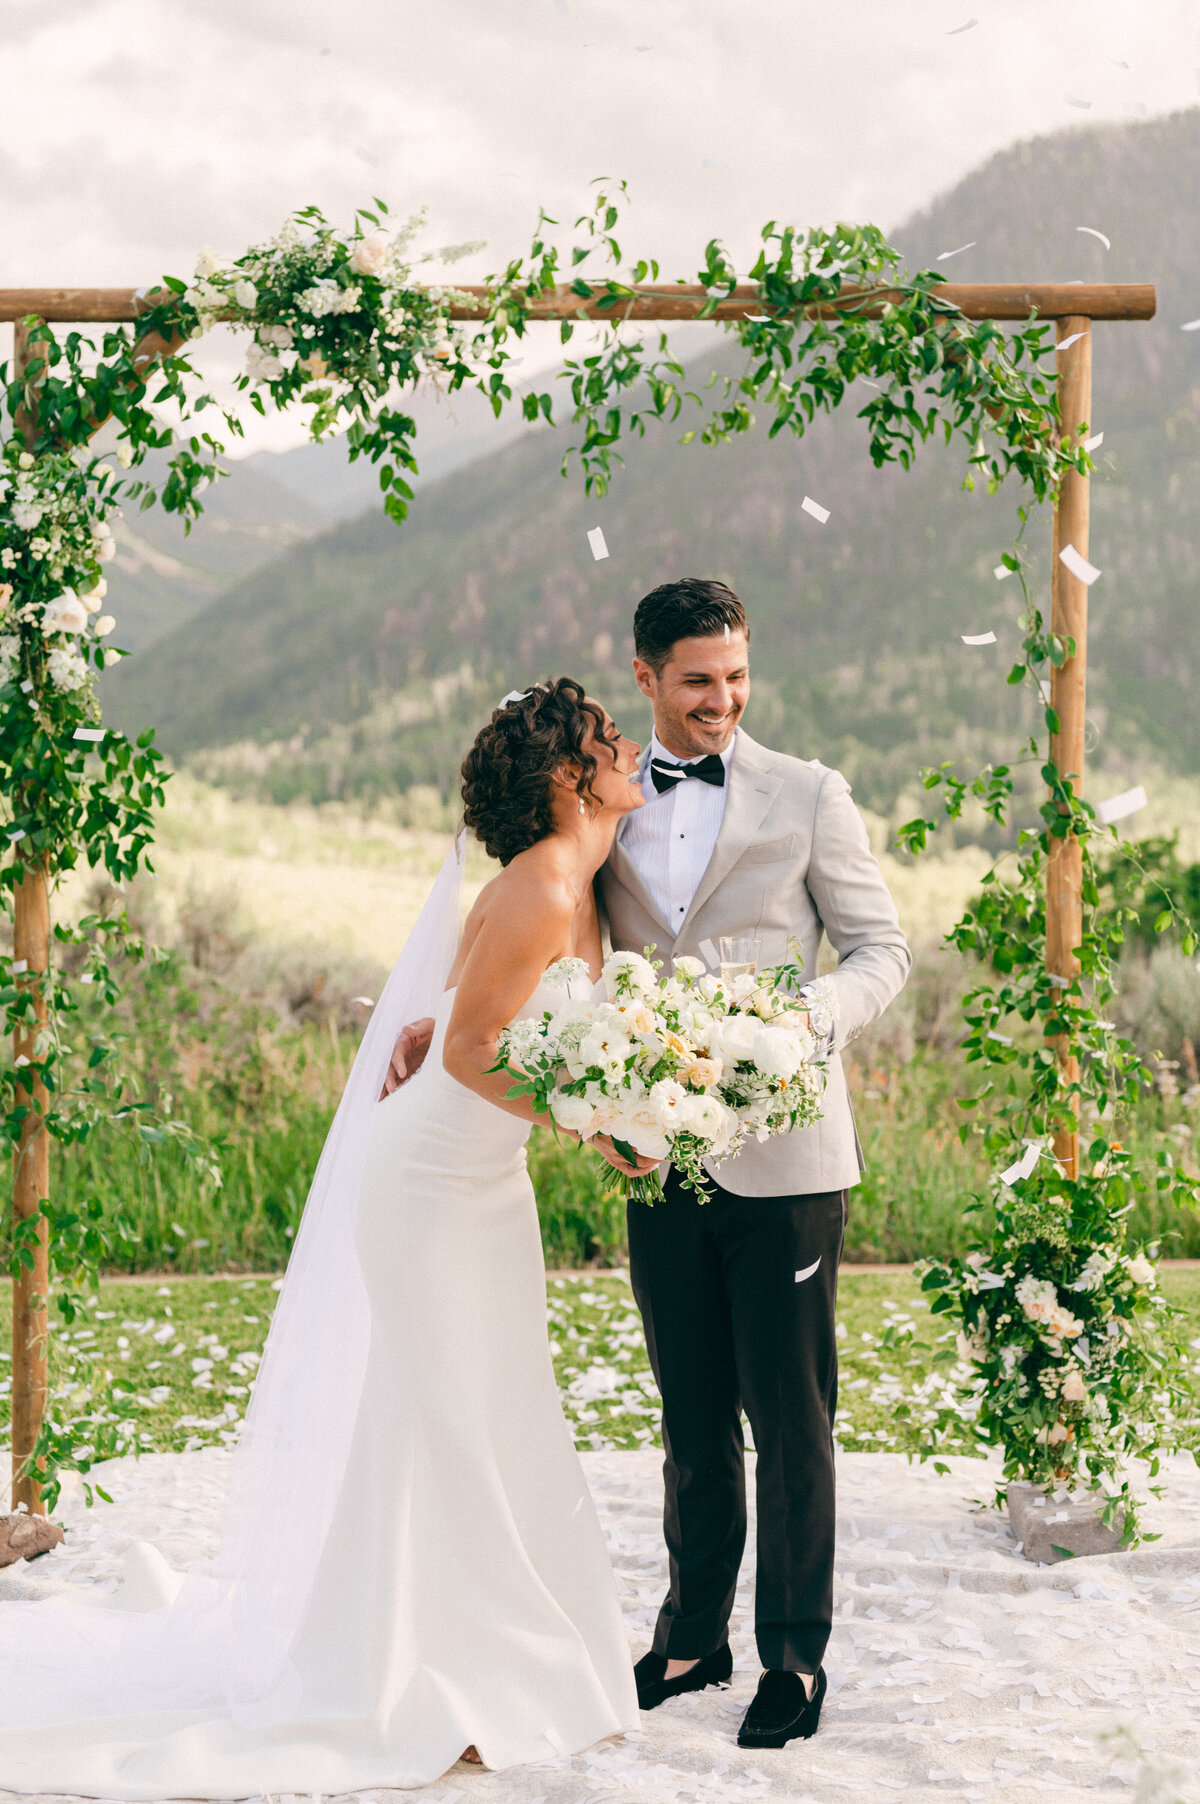 Lia-Ross-Aspen-Snowmass-Patak-Ranch-Wedding-Photography-By-Jacie-Marguerite-437